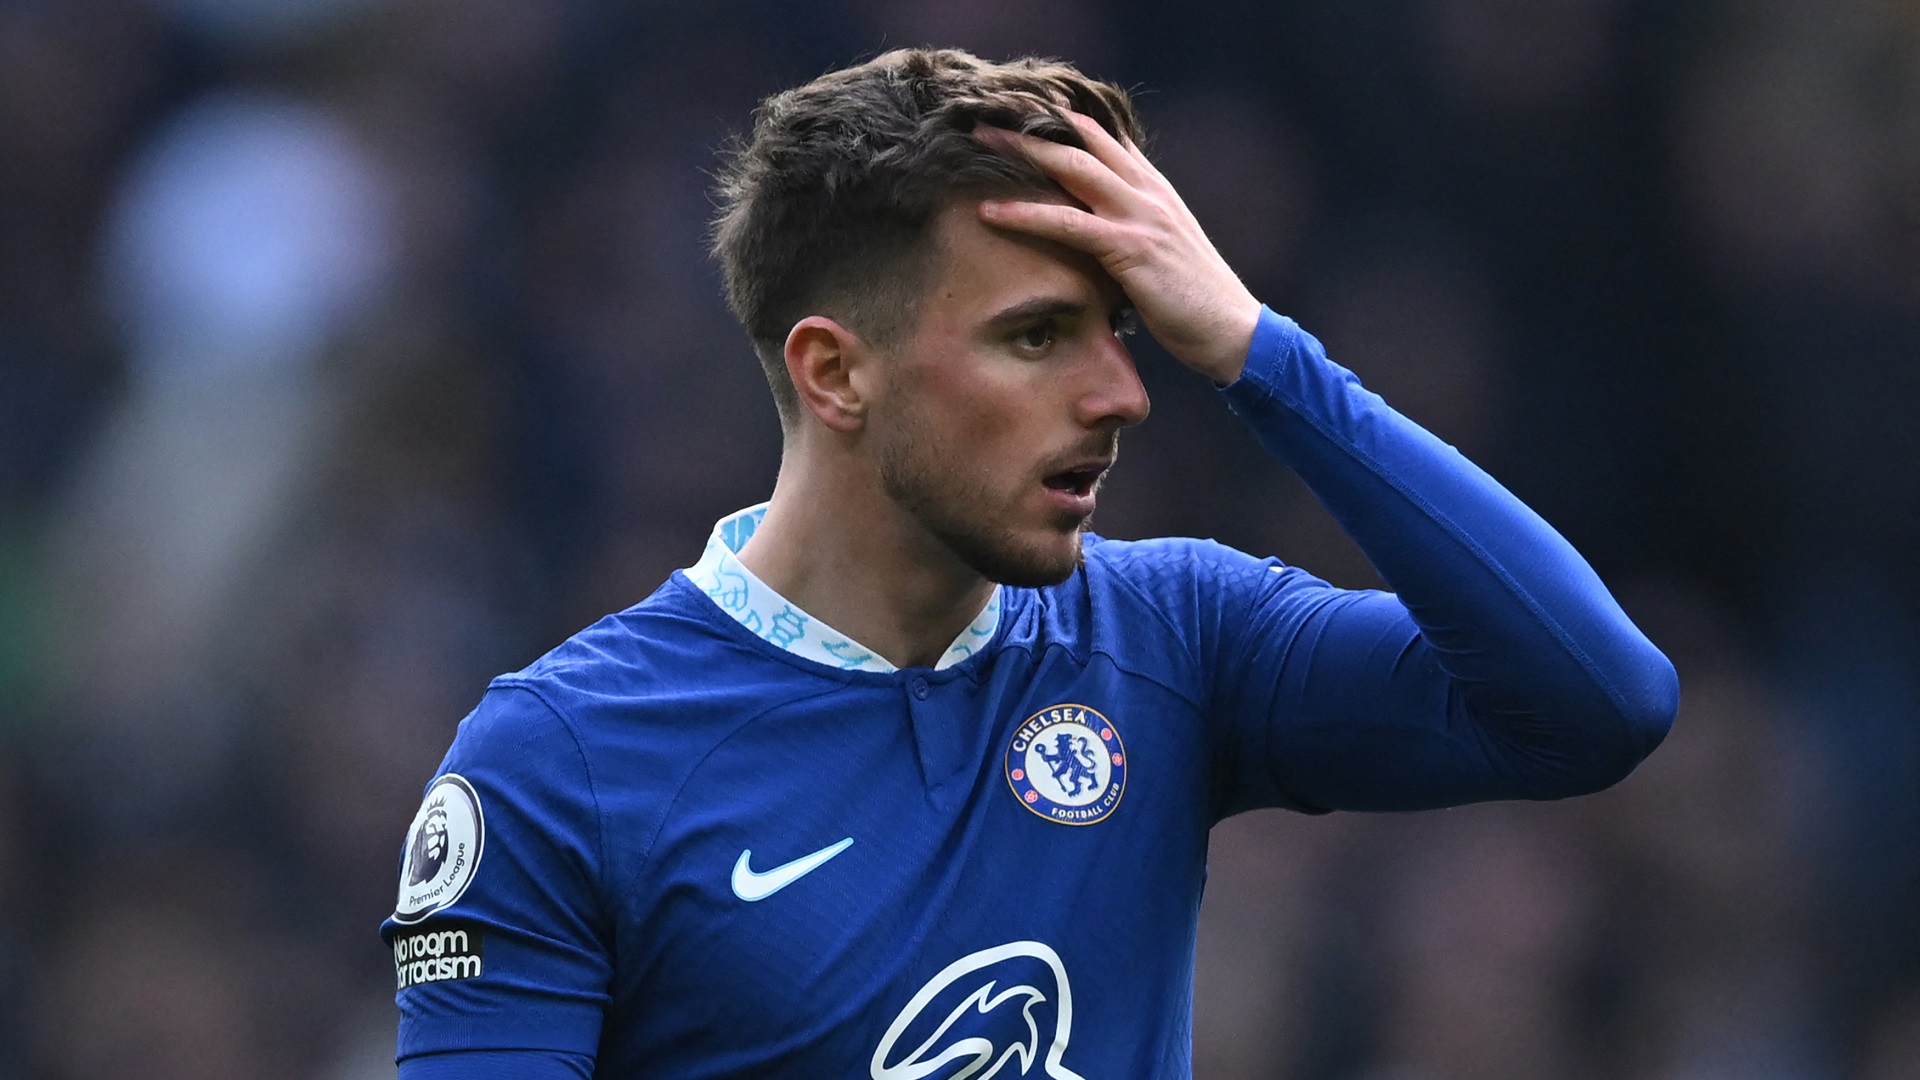 Mason Mount next club odds: Manchester United odds-on favourites for Chelsea midfielder